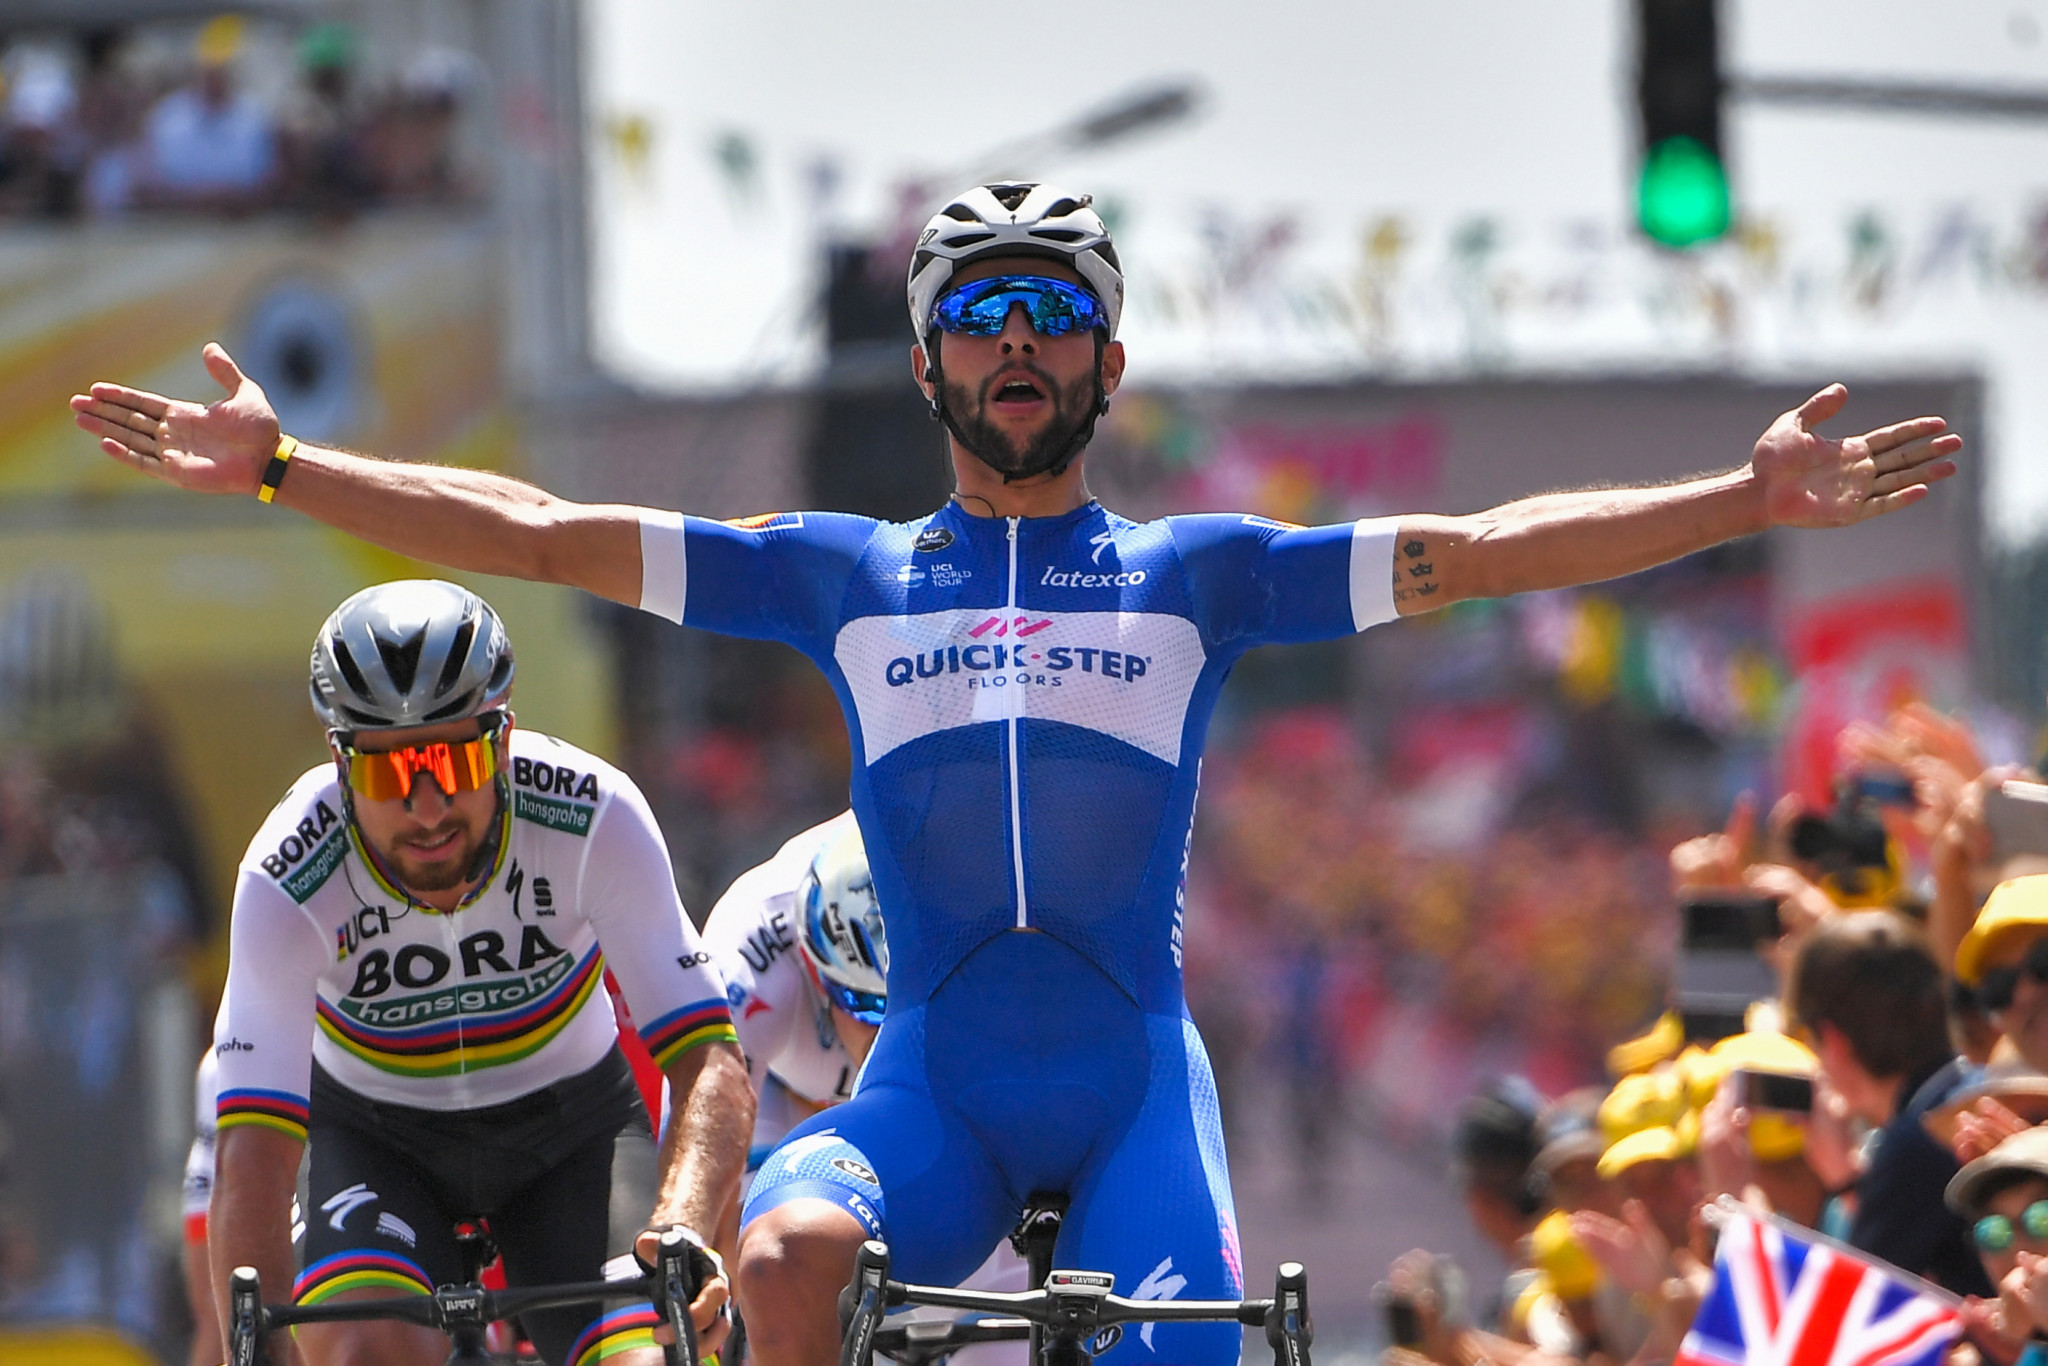 Fernando Gaviria triumphed in a sprint finish on a dramatic first day of the race ©Getty Images